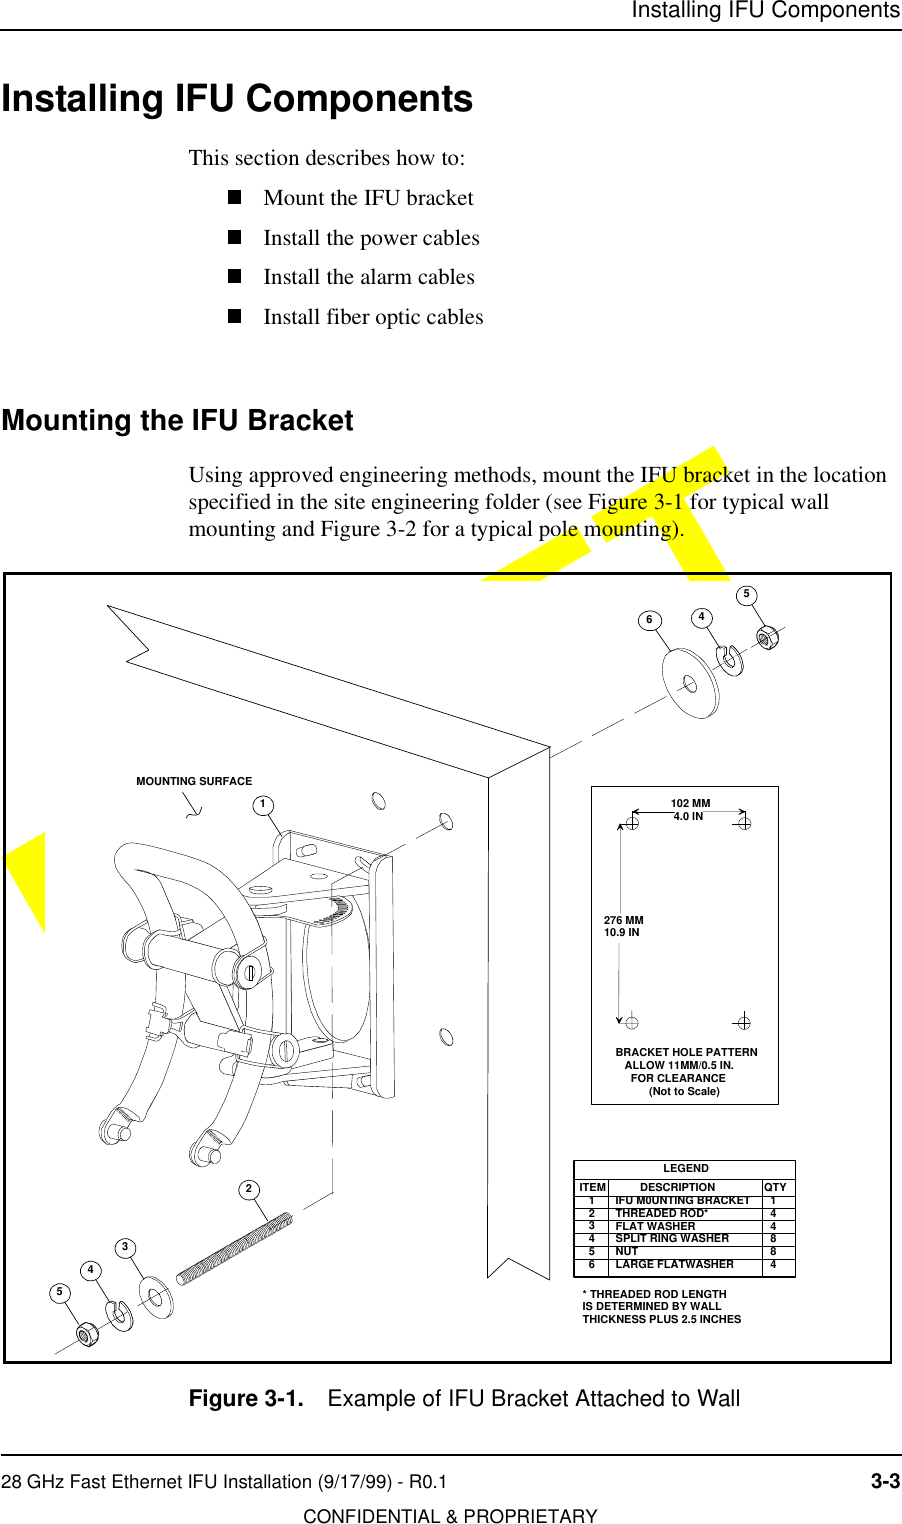 Installing IFU Components28 GHz Fast Ethernet IFU Installation (9/17/99) - R0.1 3-3CONFIDENTIAL &amp; PROPRIETARYDO NOT COPYInstalling IFU ComponentsThis section describes how to:Mount the IFU bracketInstall the power cablesInstall the alarm cablesInstall fiber optic cablesMounting the IFU Bracket Using approved engineering methods, mount the IFU bracket in the location specified in the site engineering folder (see Figure 3-1 for typical wall mounting and Figure 3-2 for a typical pole mounting).Figure 3-1. Example of IFU Bracket Attached to Wall 31456452MOUNTING SURFACELEGENDITEM   1   2   3   4   5   6        DESCRIPTIONIFU M0UNTING BRACKETTHREADED ROD*FLAT WASHERSPLIT RING WASHERNUTLARGE FLATWASHERQTY  1  4  4  8  8  4* THREADED ROD LENGTH IS DETERMINED BY WALLTHICKNESS PLUS 2.5 INCHES 102 MM 4.0 IN276 MM10.9 IN    BRACKET HOLE PATTERN       ALLOW 11MM/0.5 IN.          FOR CLEARANCE               (Not to Scale)